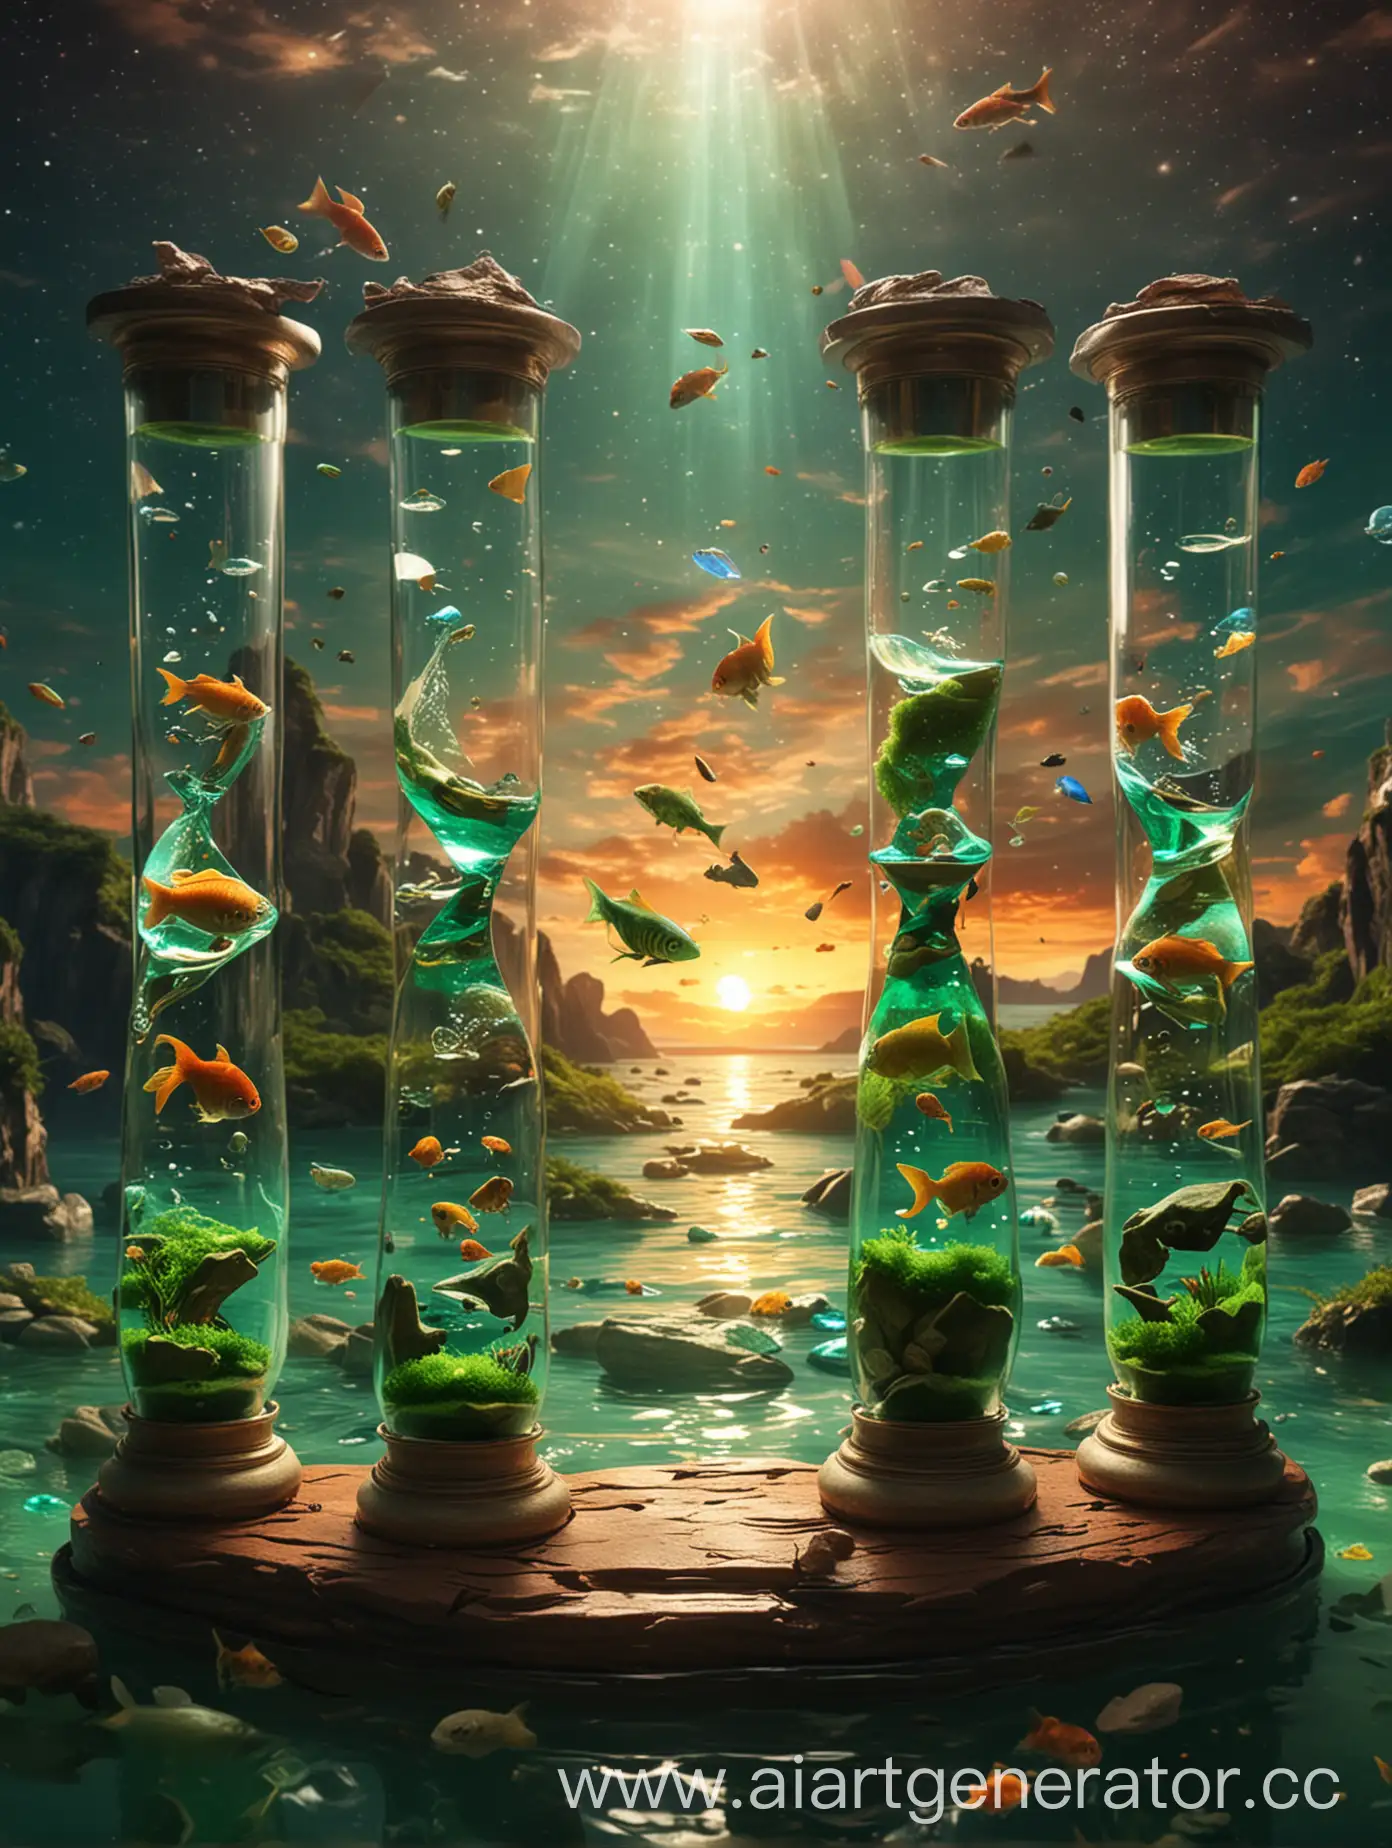 From the broken hourglasses, in space, flows a bright lively green river with exotic fish. In the top part of the hourglasses, there's a sunset, and in the bottom part, there's a sunset, inside the hourglasses their own world.